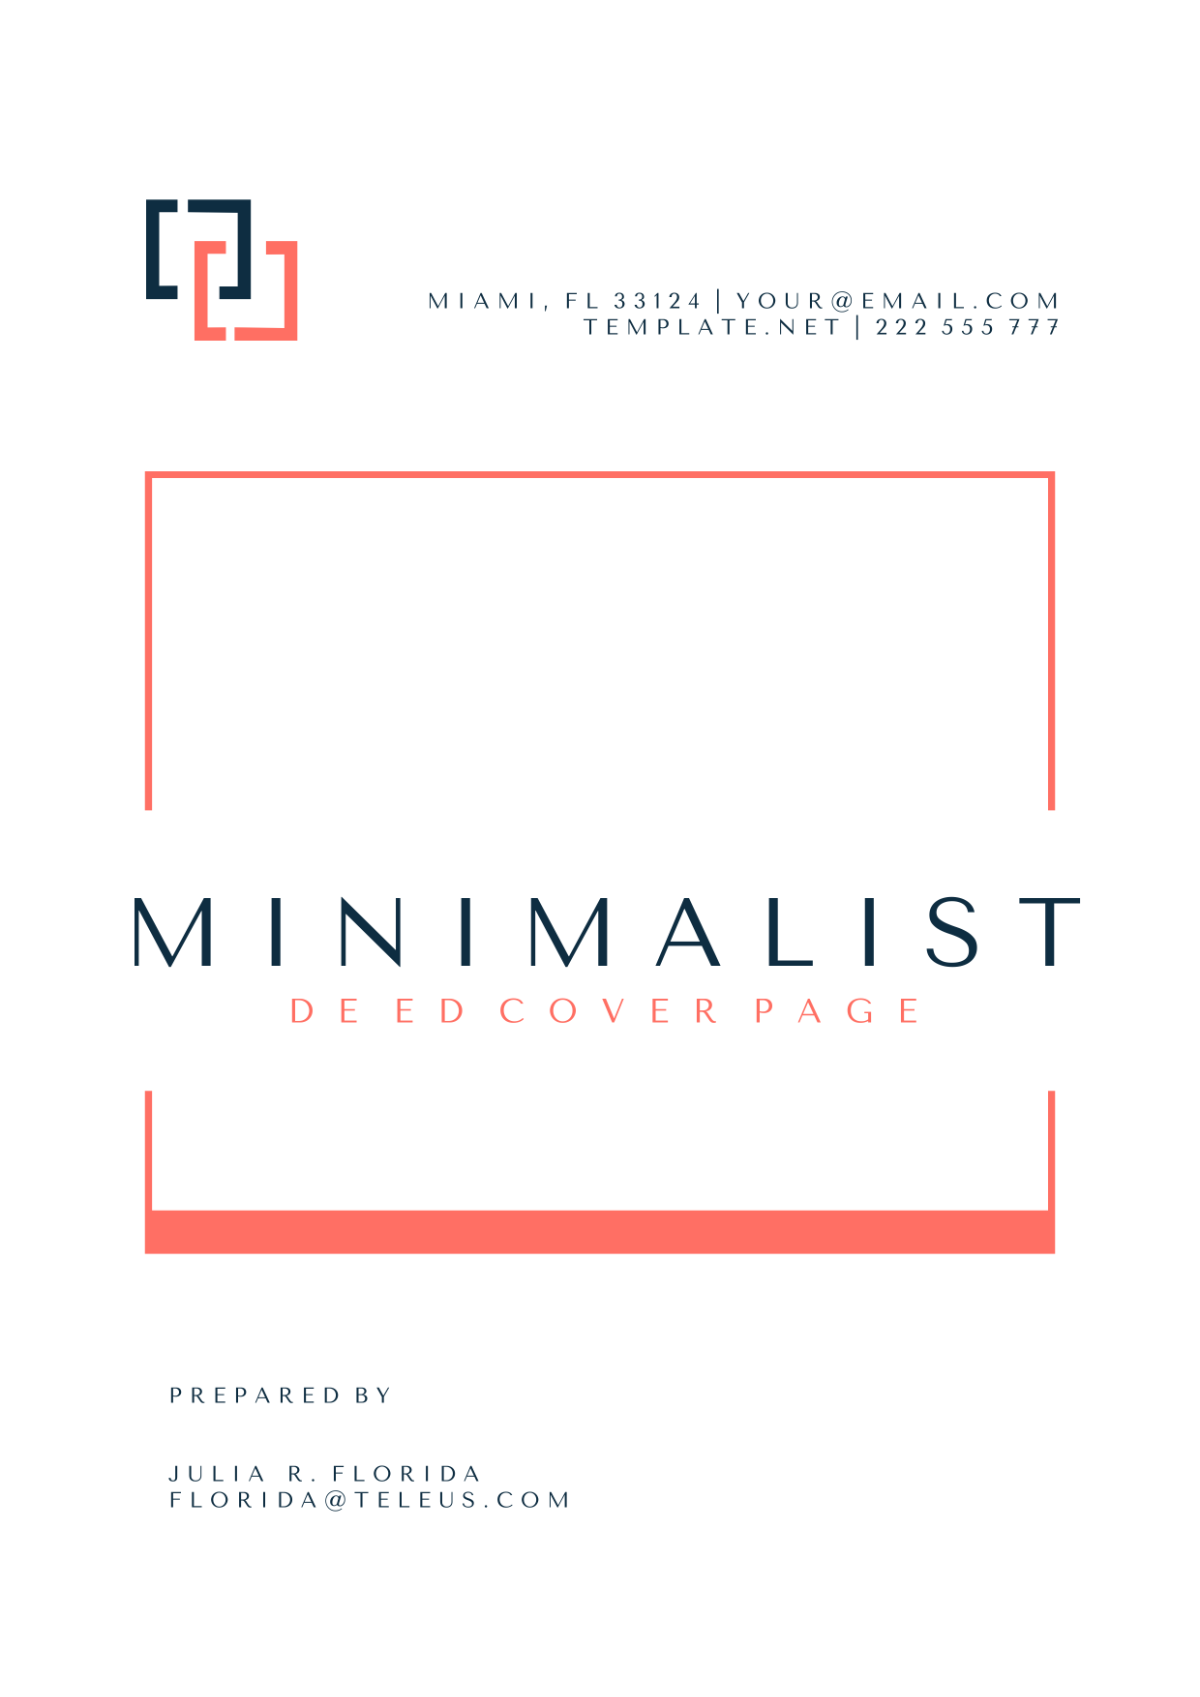 Minimalist Deed Cover Page